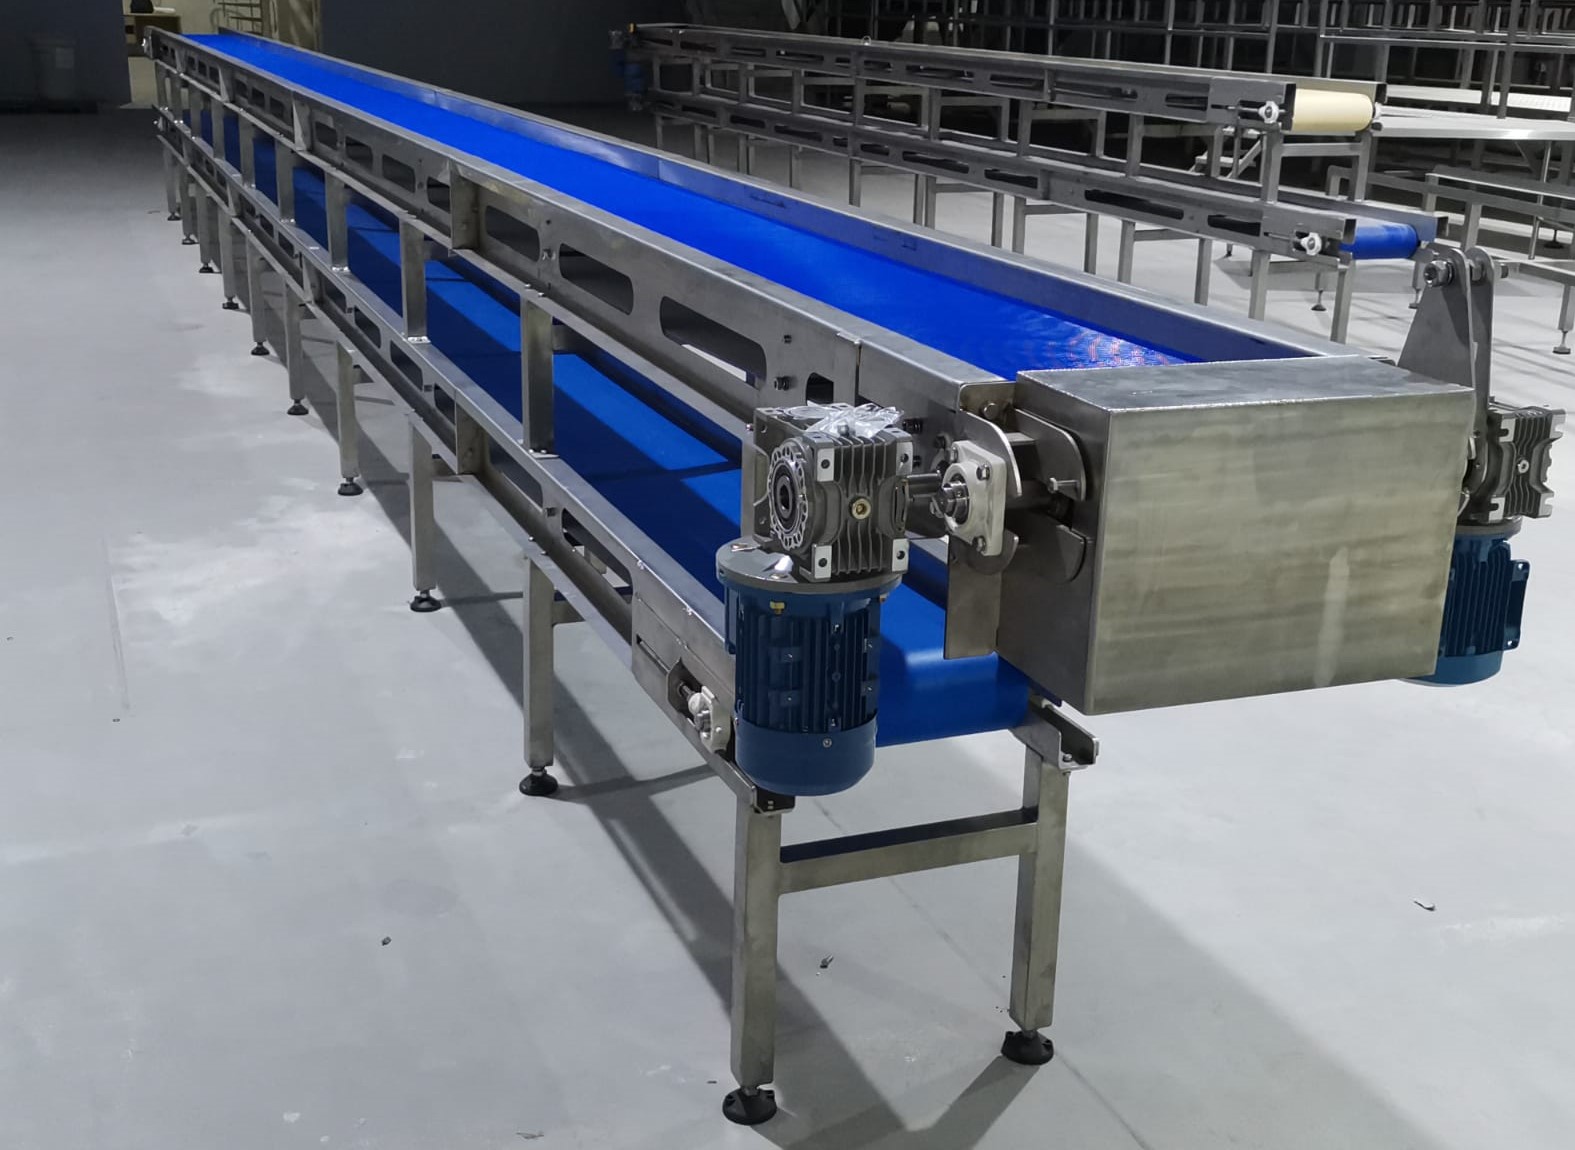 http://Double-stack-cutting-and-waste-conveyor-2